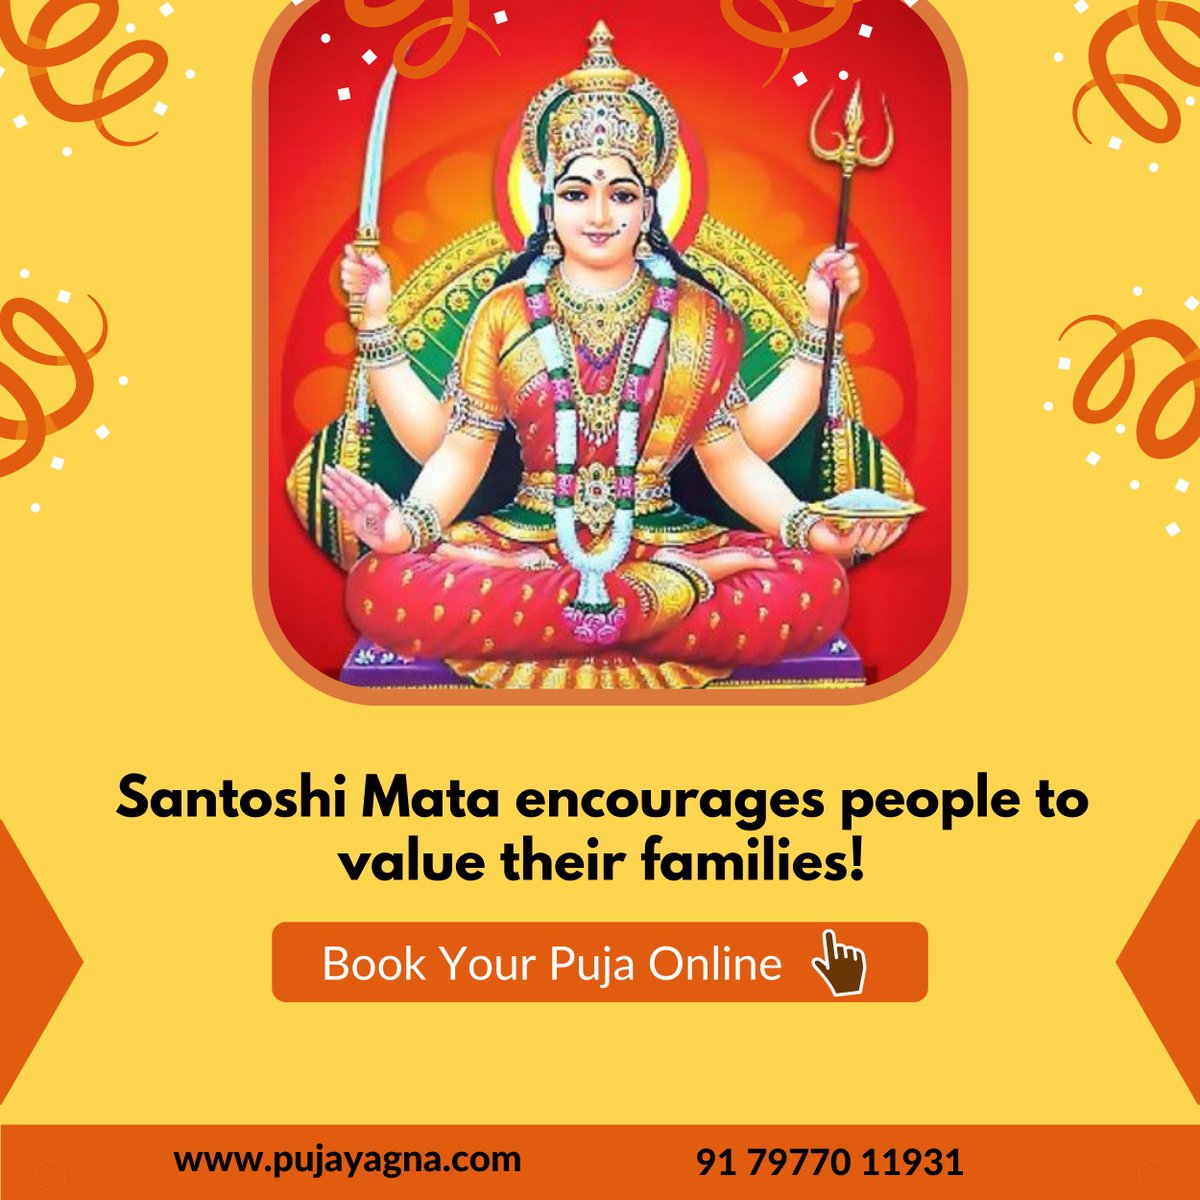 Santoshi Mata encourages people to value their families!

Visit pujayagna.com/products/santo…

#onlinepoojabooking #onlinepoojaservices #onlineprasad #onlinebookings #bookpanditonline #parvati #bookpujaonline #pujaservices #onlineastrologerconsultation